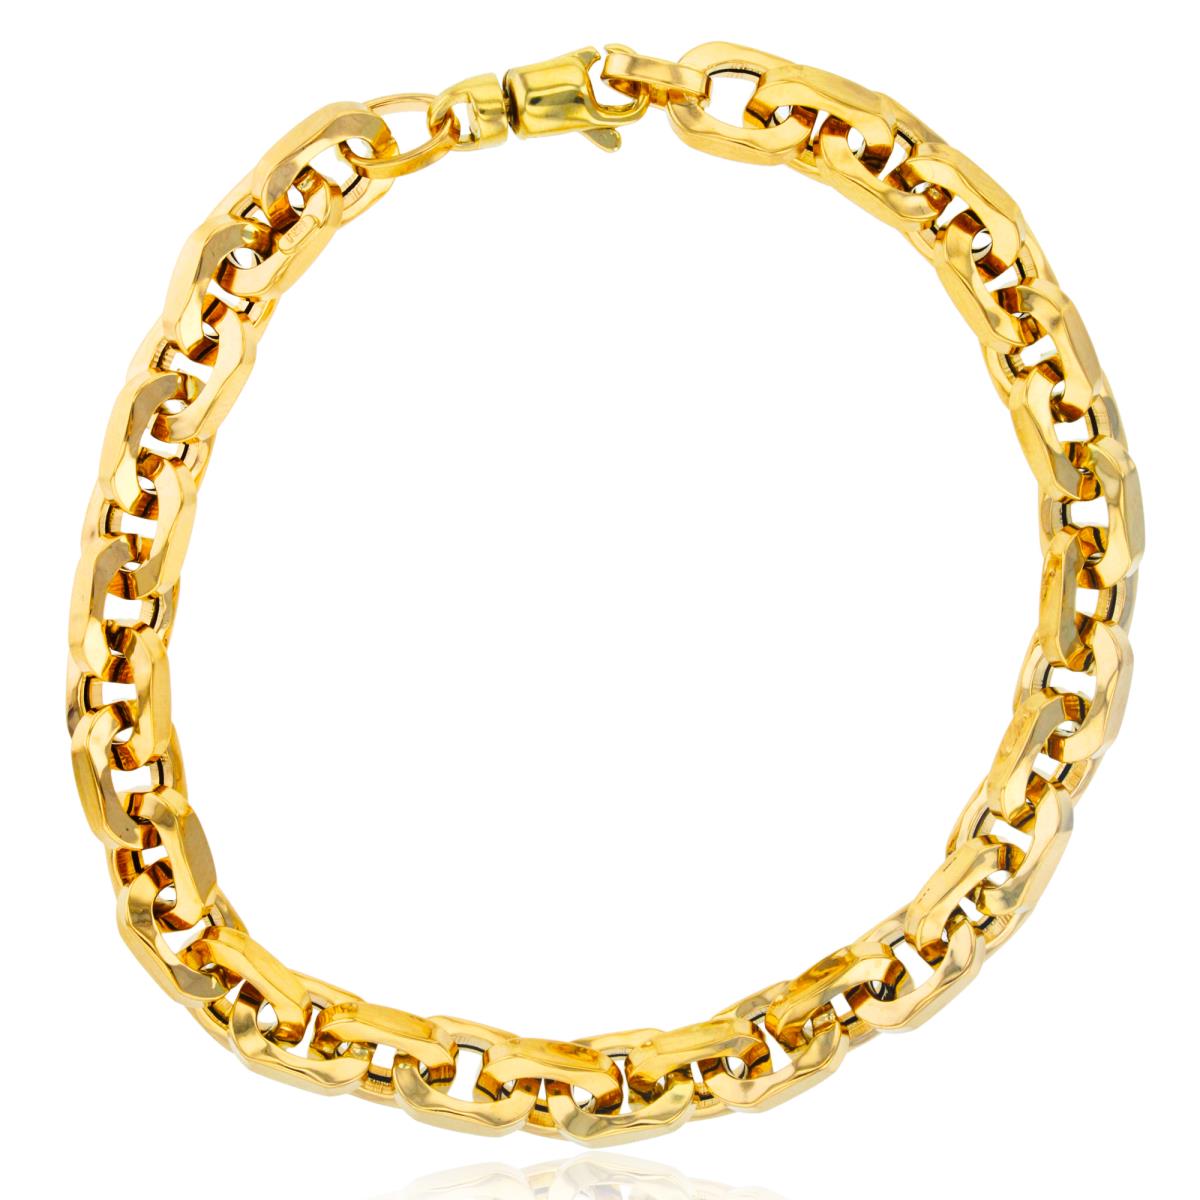 14K Yellow Gold 7mm Hammered Cable 8.25" Chain Bracelet